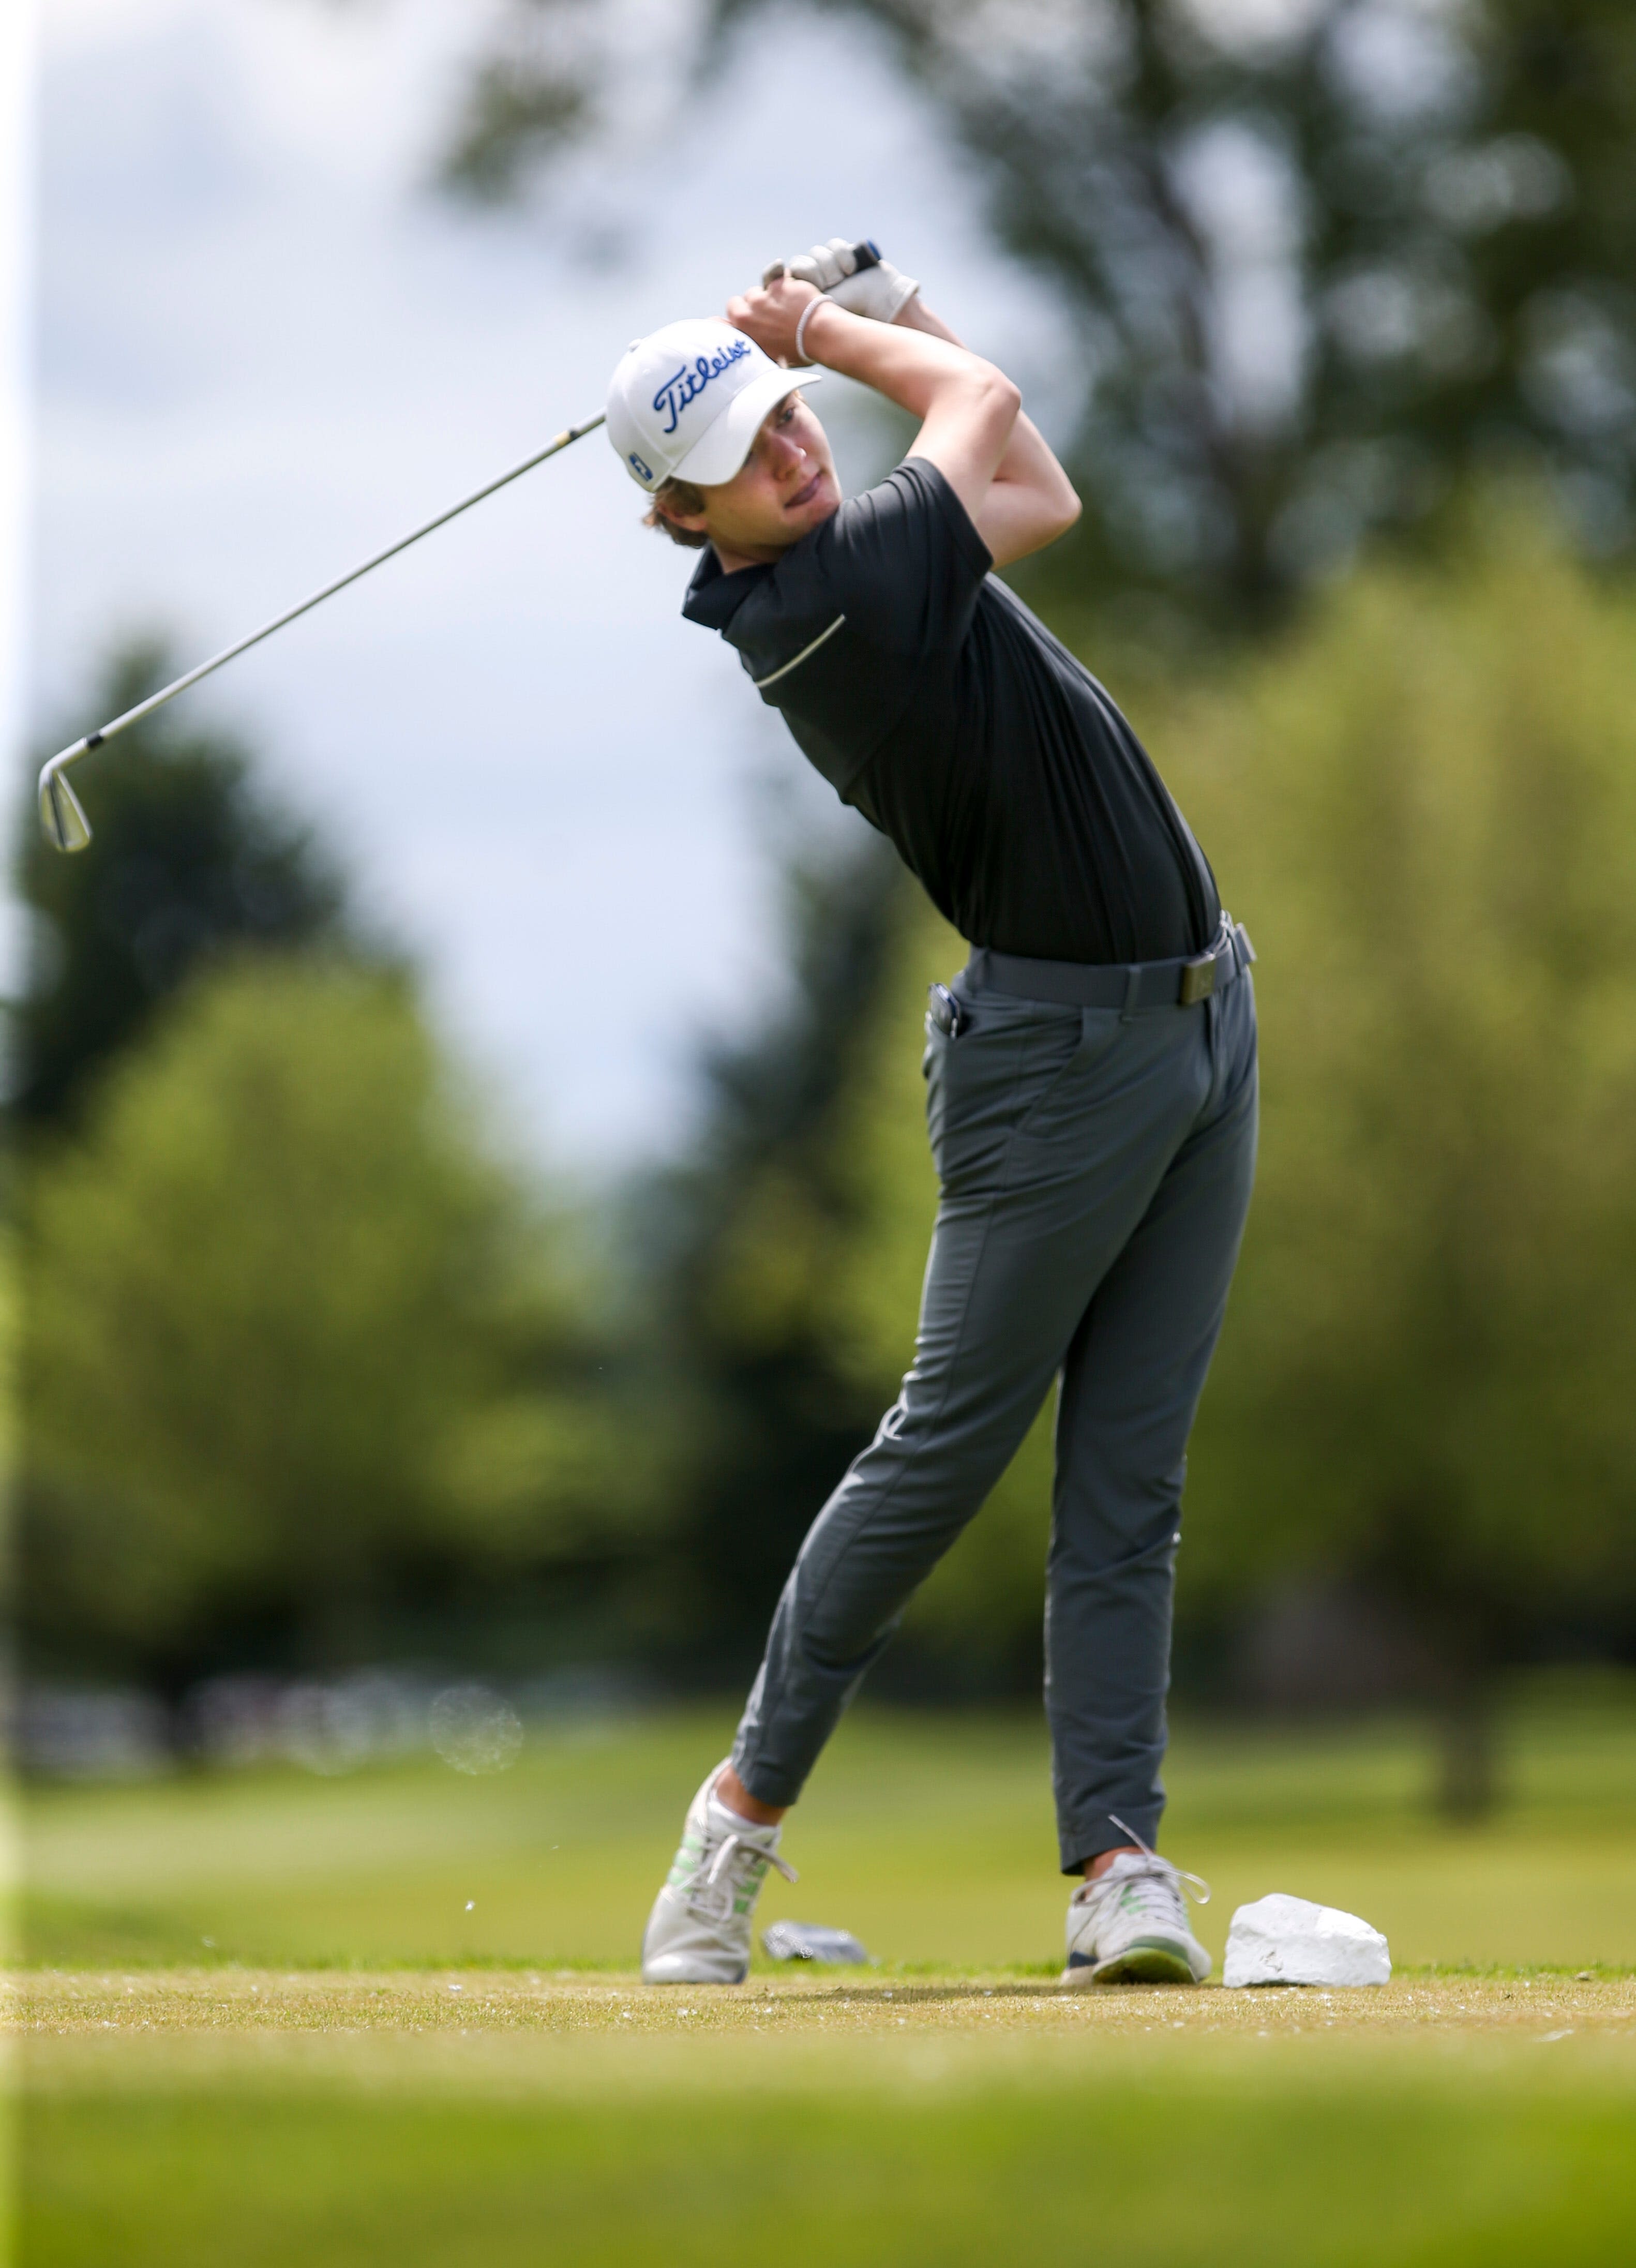 Top Salem-area girls and boys golfers to watch in OSAA state championships